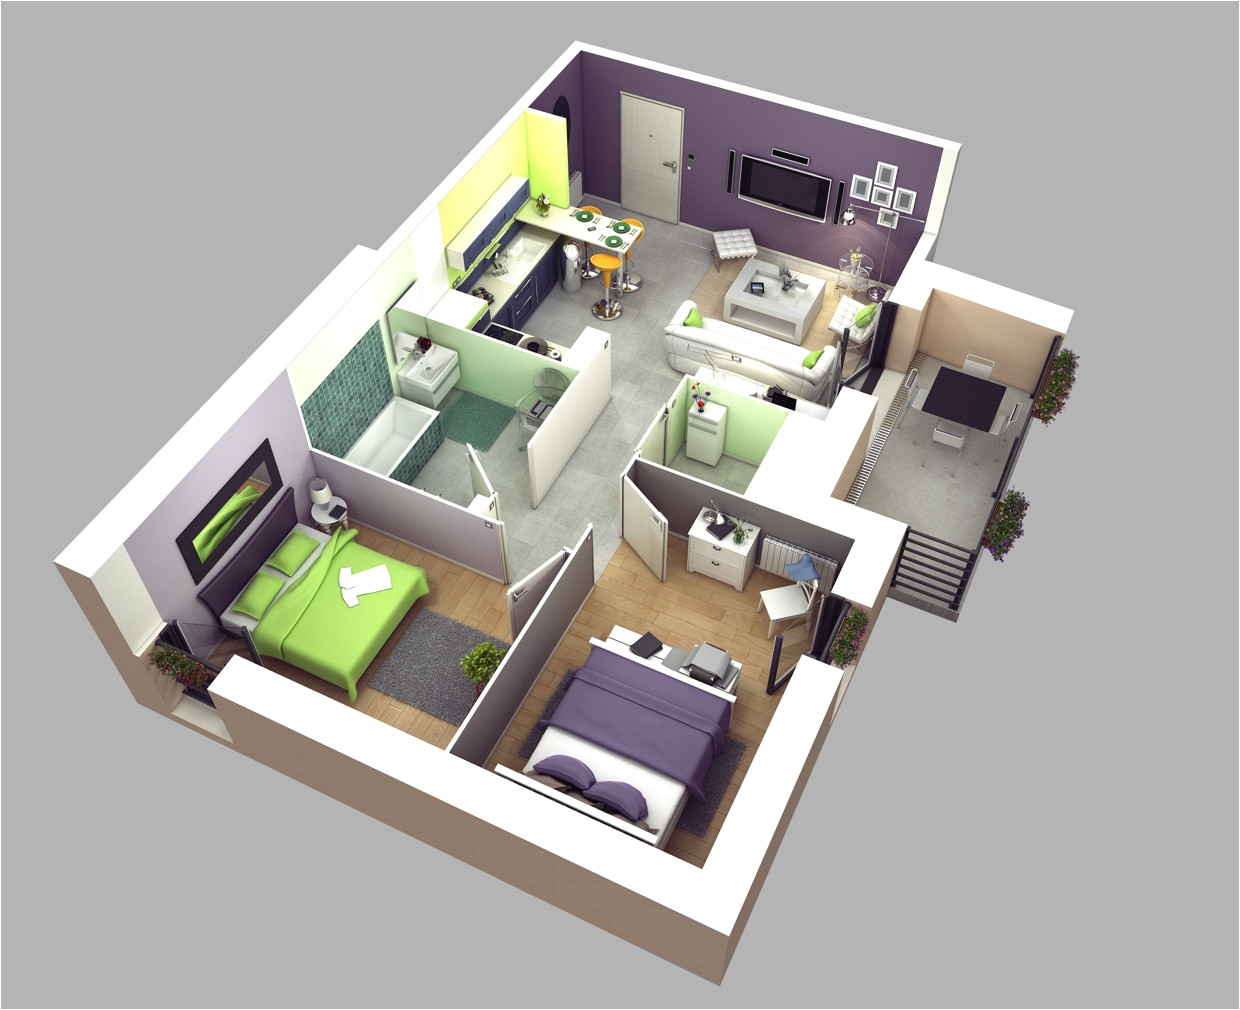 2 bedroom apartmenthouse plans